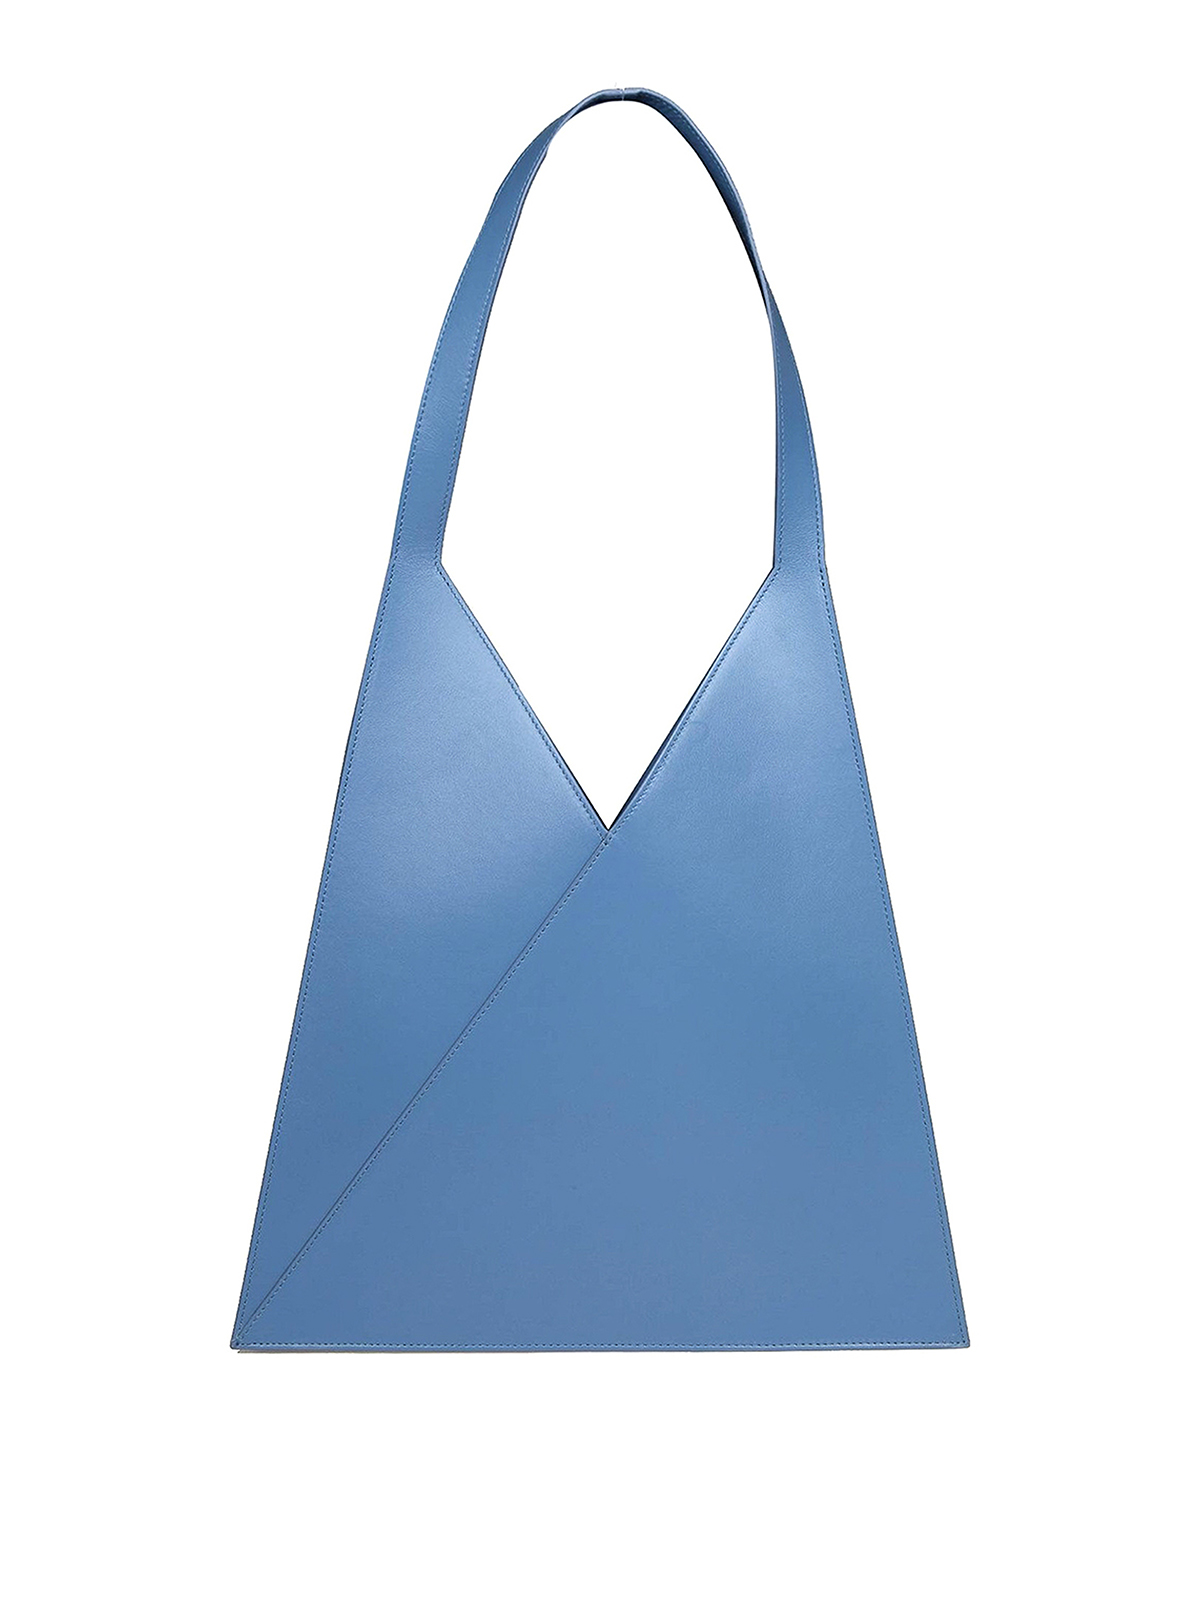 Furla Triangle Leather Tote Bag - Blue for Women